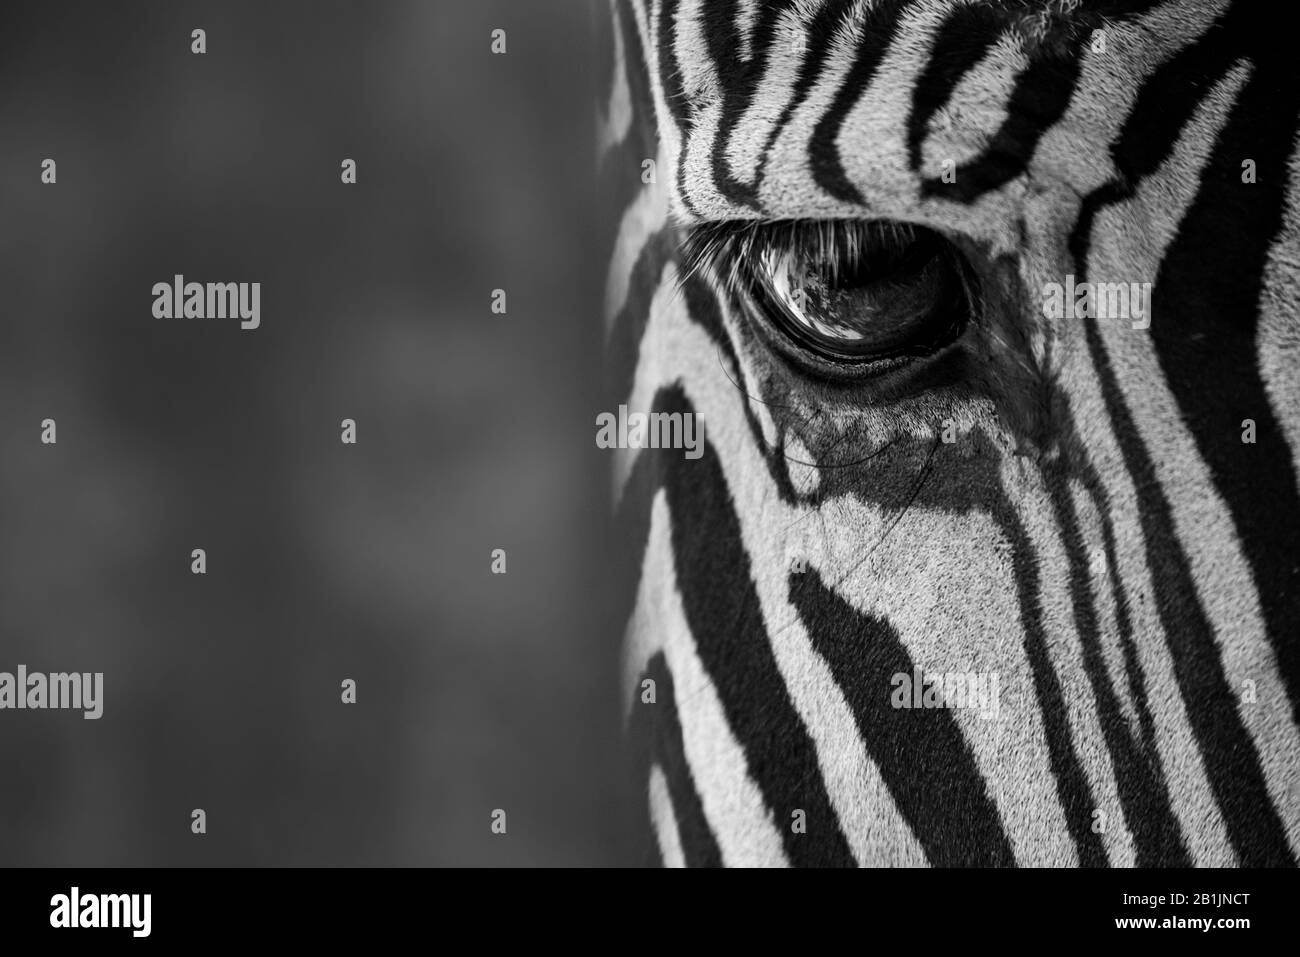 The right eye of a Grevy's zebra can be seen in close-up against a blueish background. Shot with a Nikon D800 at the Parque de la Naturaleza de Cabárc Stock Photo